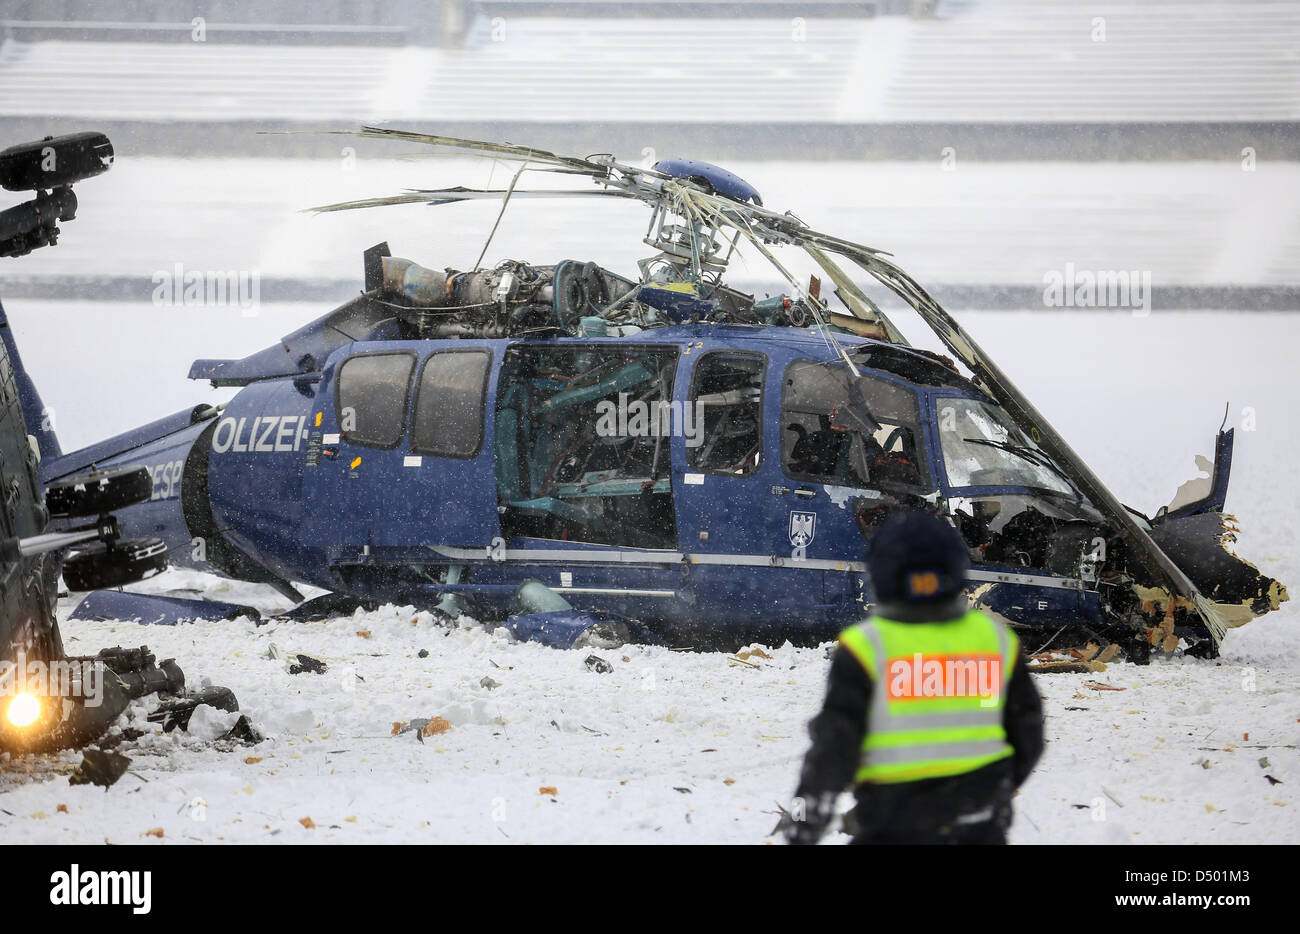 Berlin, Germany. 21 March 2013. Two crashed helicopters of the German federal police lie on the May field at the Olympic Stadium in Berlin.  During an exercise of the federal police the two helicopters collided as they approached for landing. Photo: HANNIBAL/DPA/Alamy Live News Stock Photo